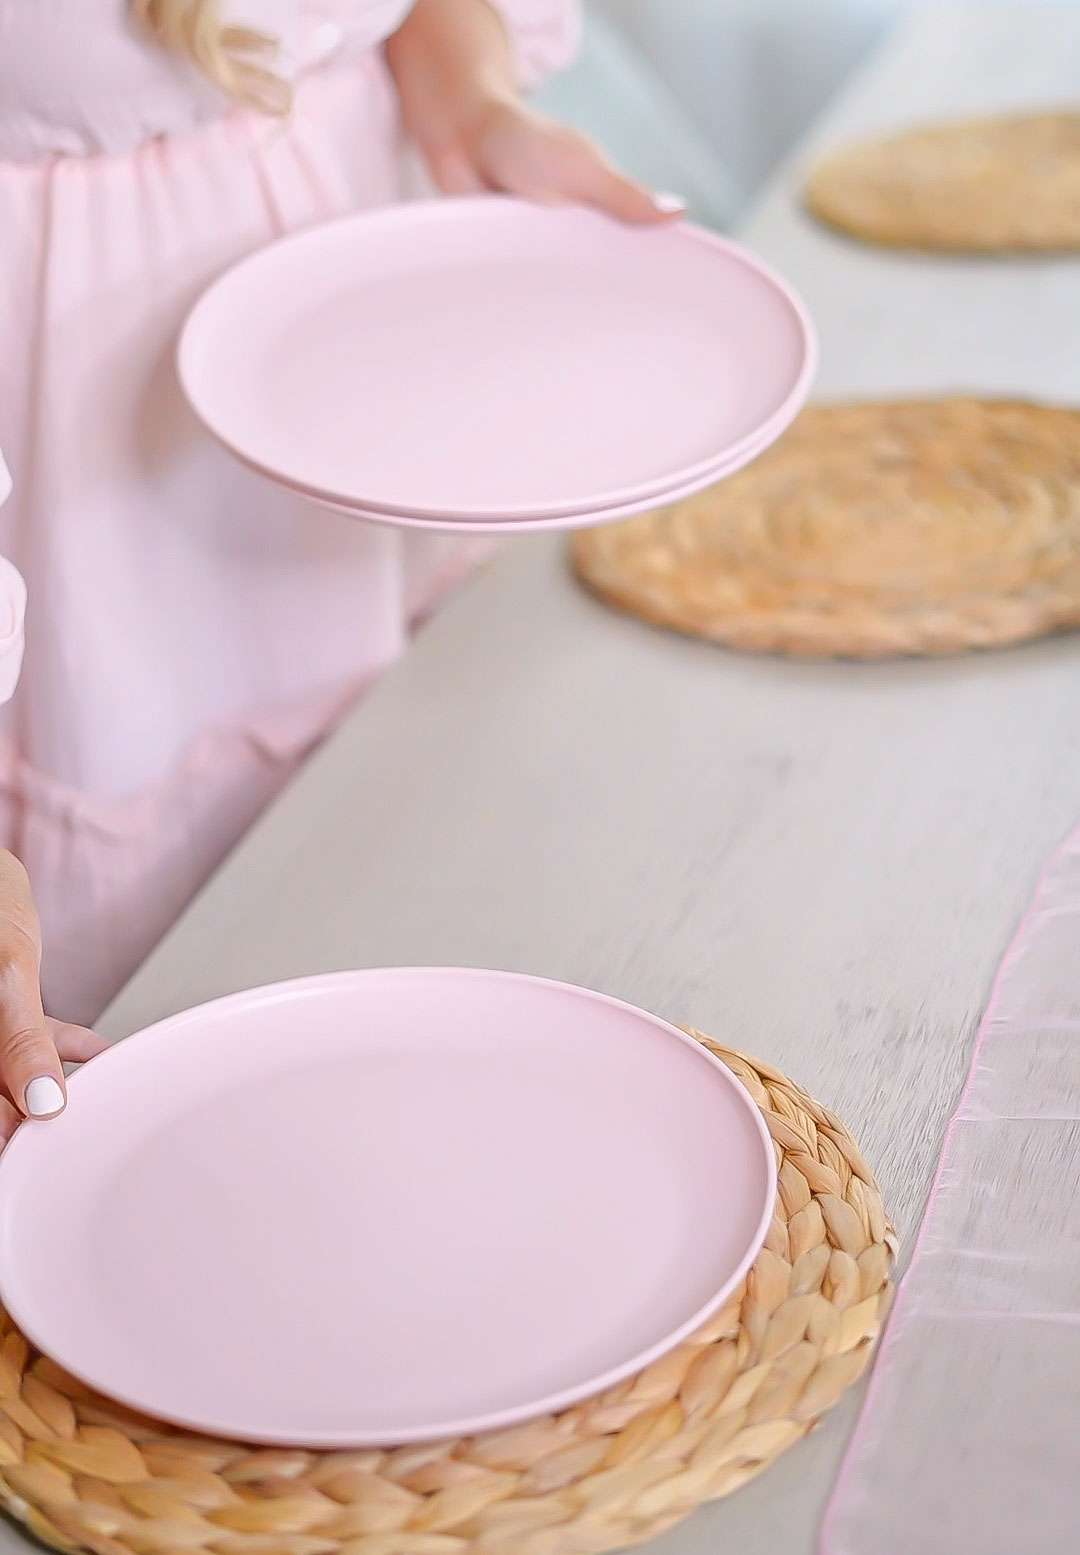 Florida lifestyle and home blogger Jill DiGioia shares an easy spring tablescape layering woven placemats and pink plates.